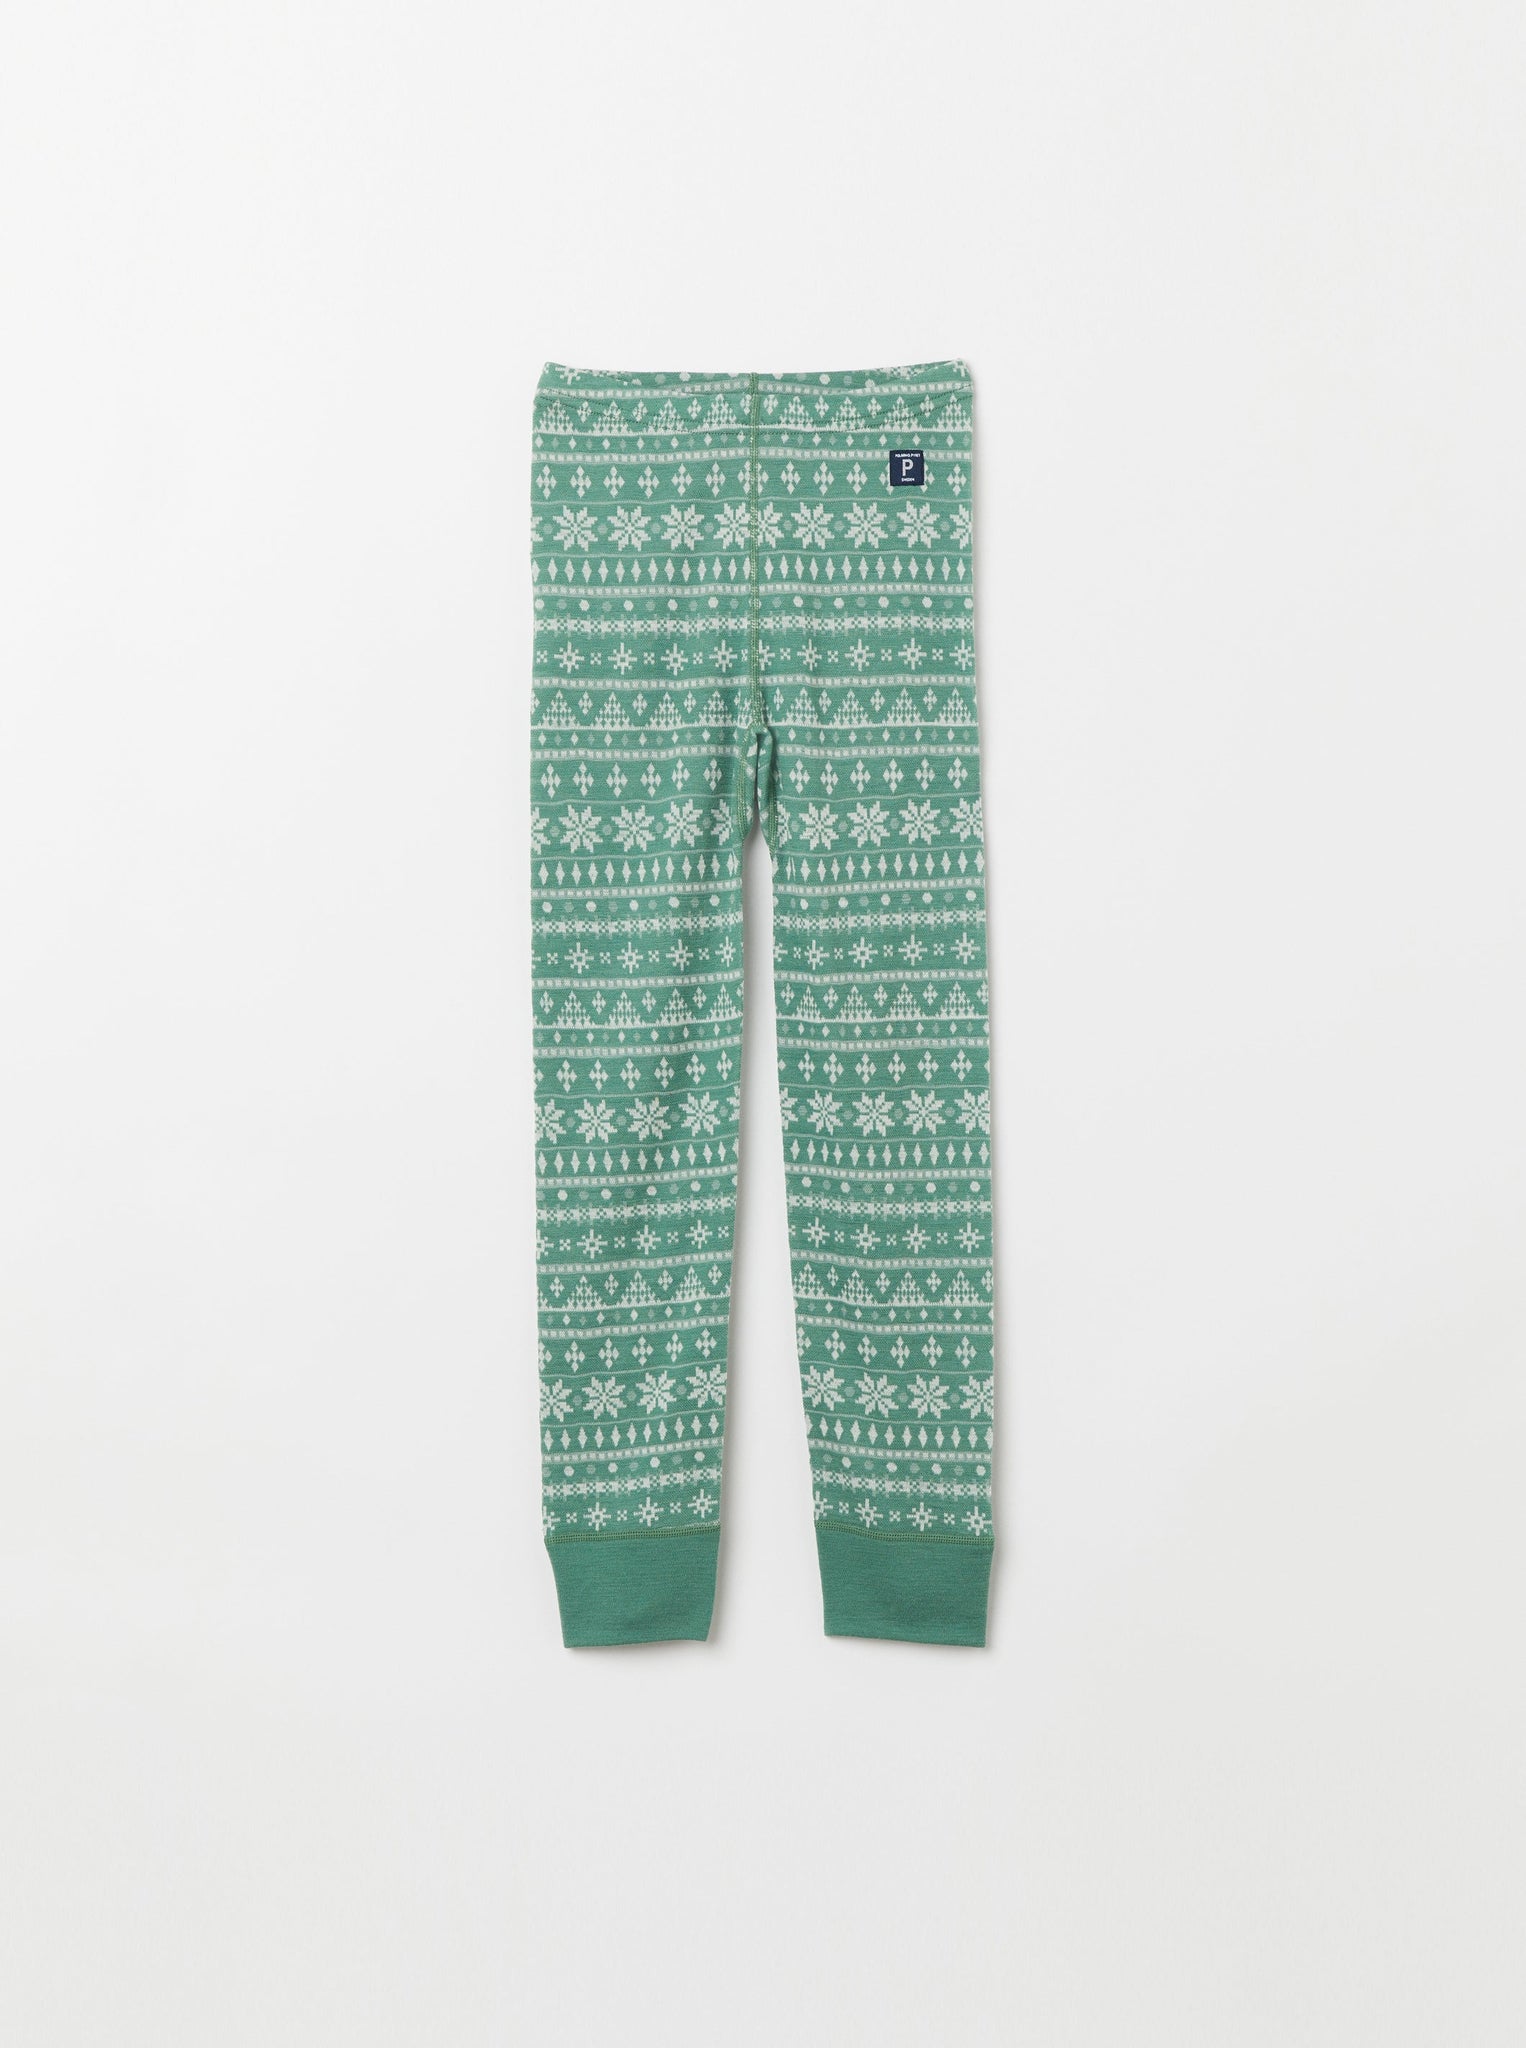 Merino Green Thermal Kids Long Johns from the Polarn O. Pyret kidswear collection. Made from sustainable sources.